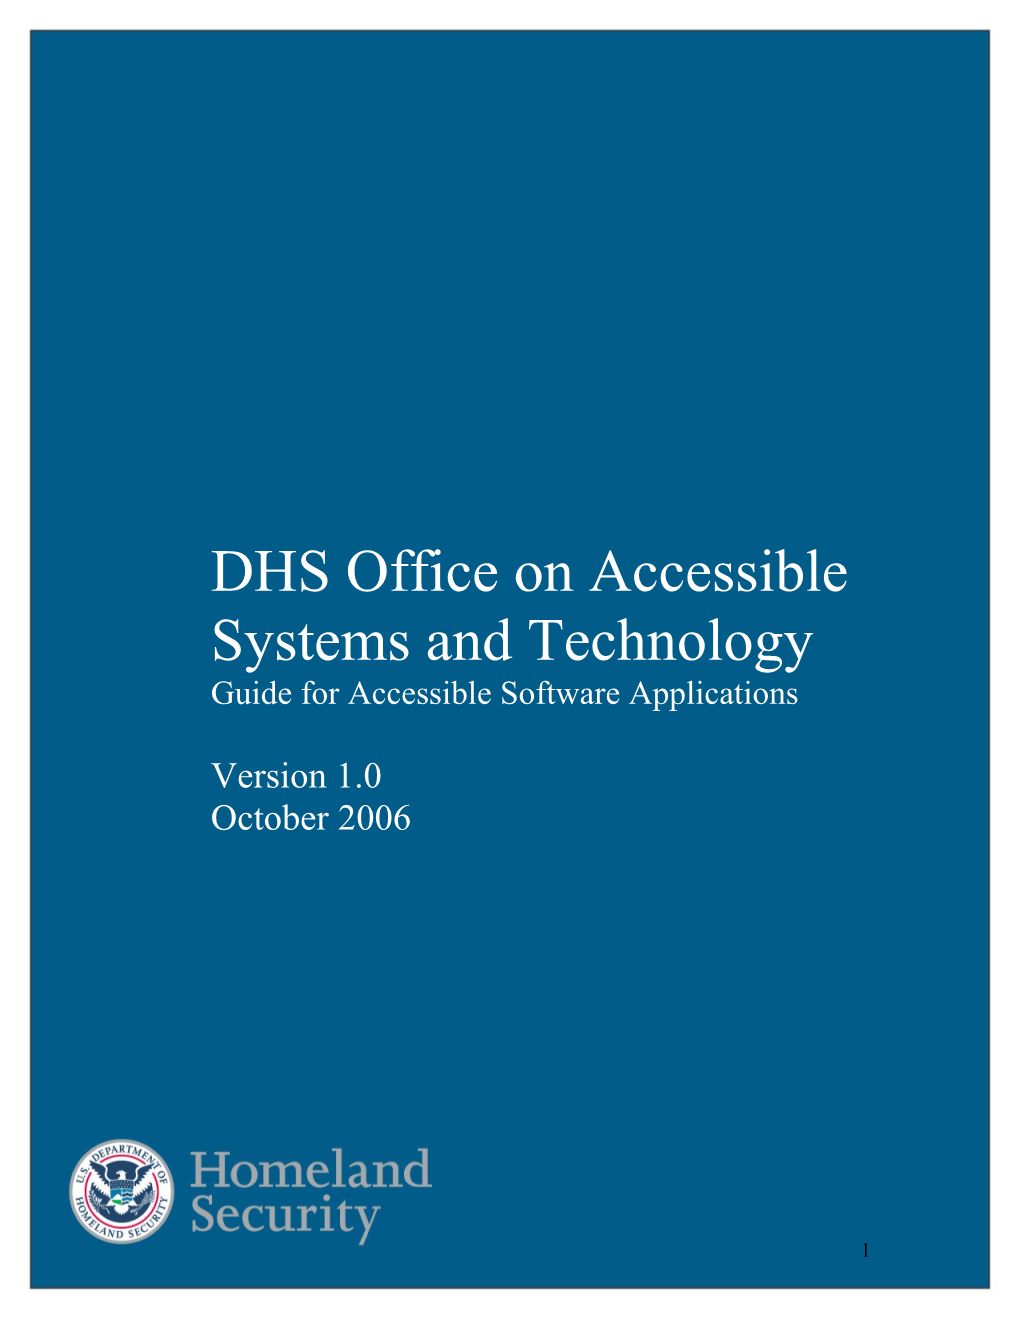 DHS Office on Accessible Systems and Technology